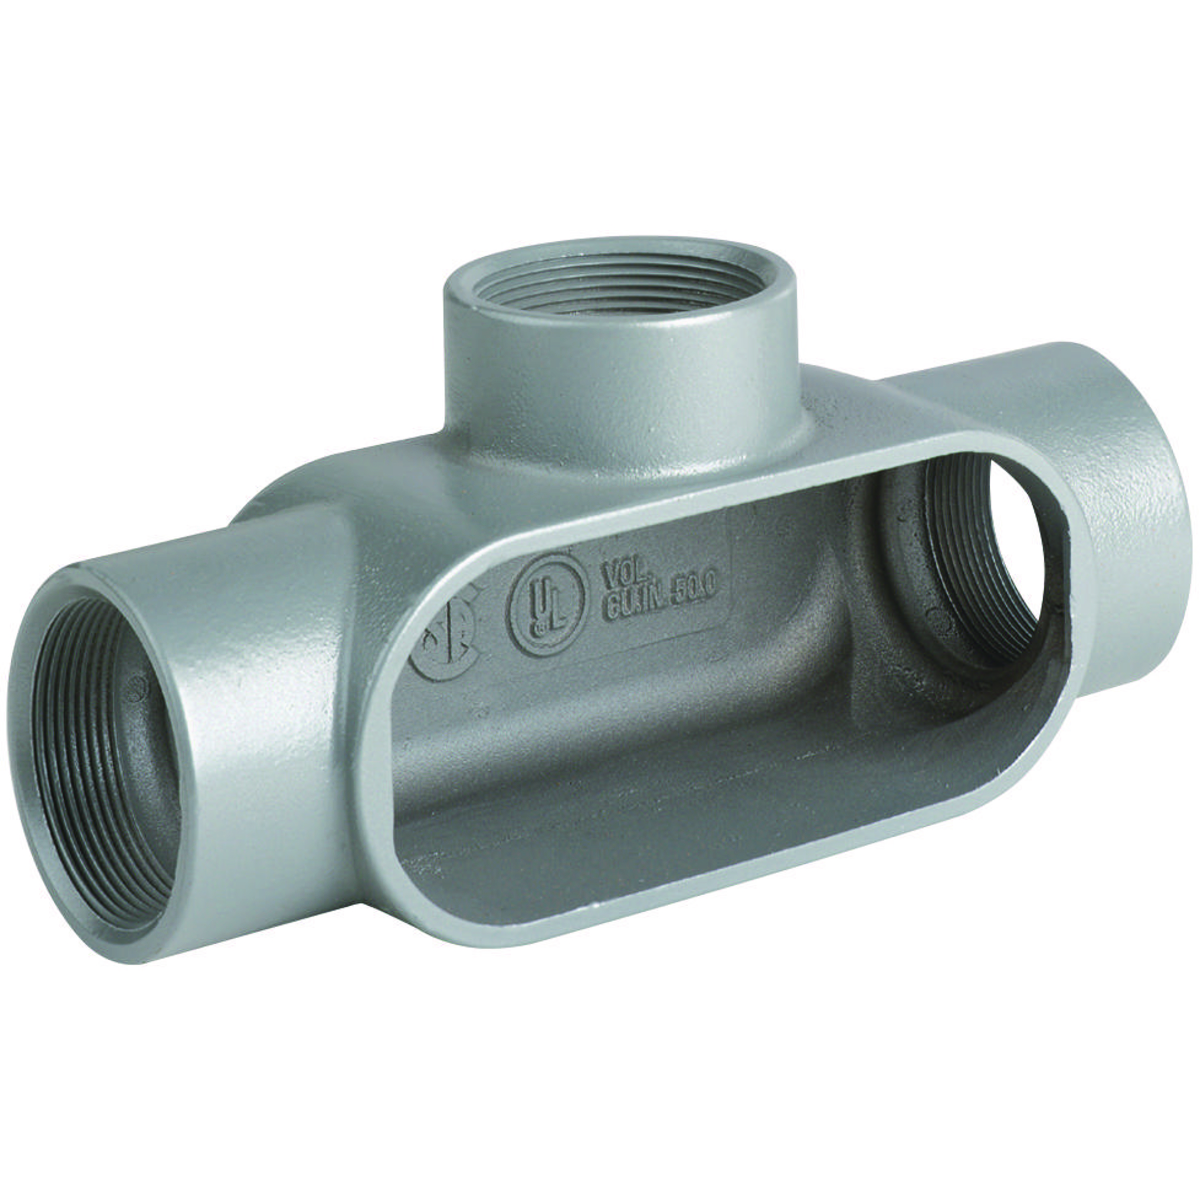 DURALOY 7 SERIES - IRON CONDUIT BODY - T TYPE - HUB SIZE 1-1/2 INCH -VOLUME 27.0 CUBIC INCHES